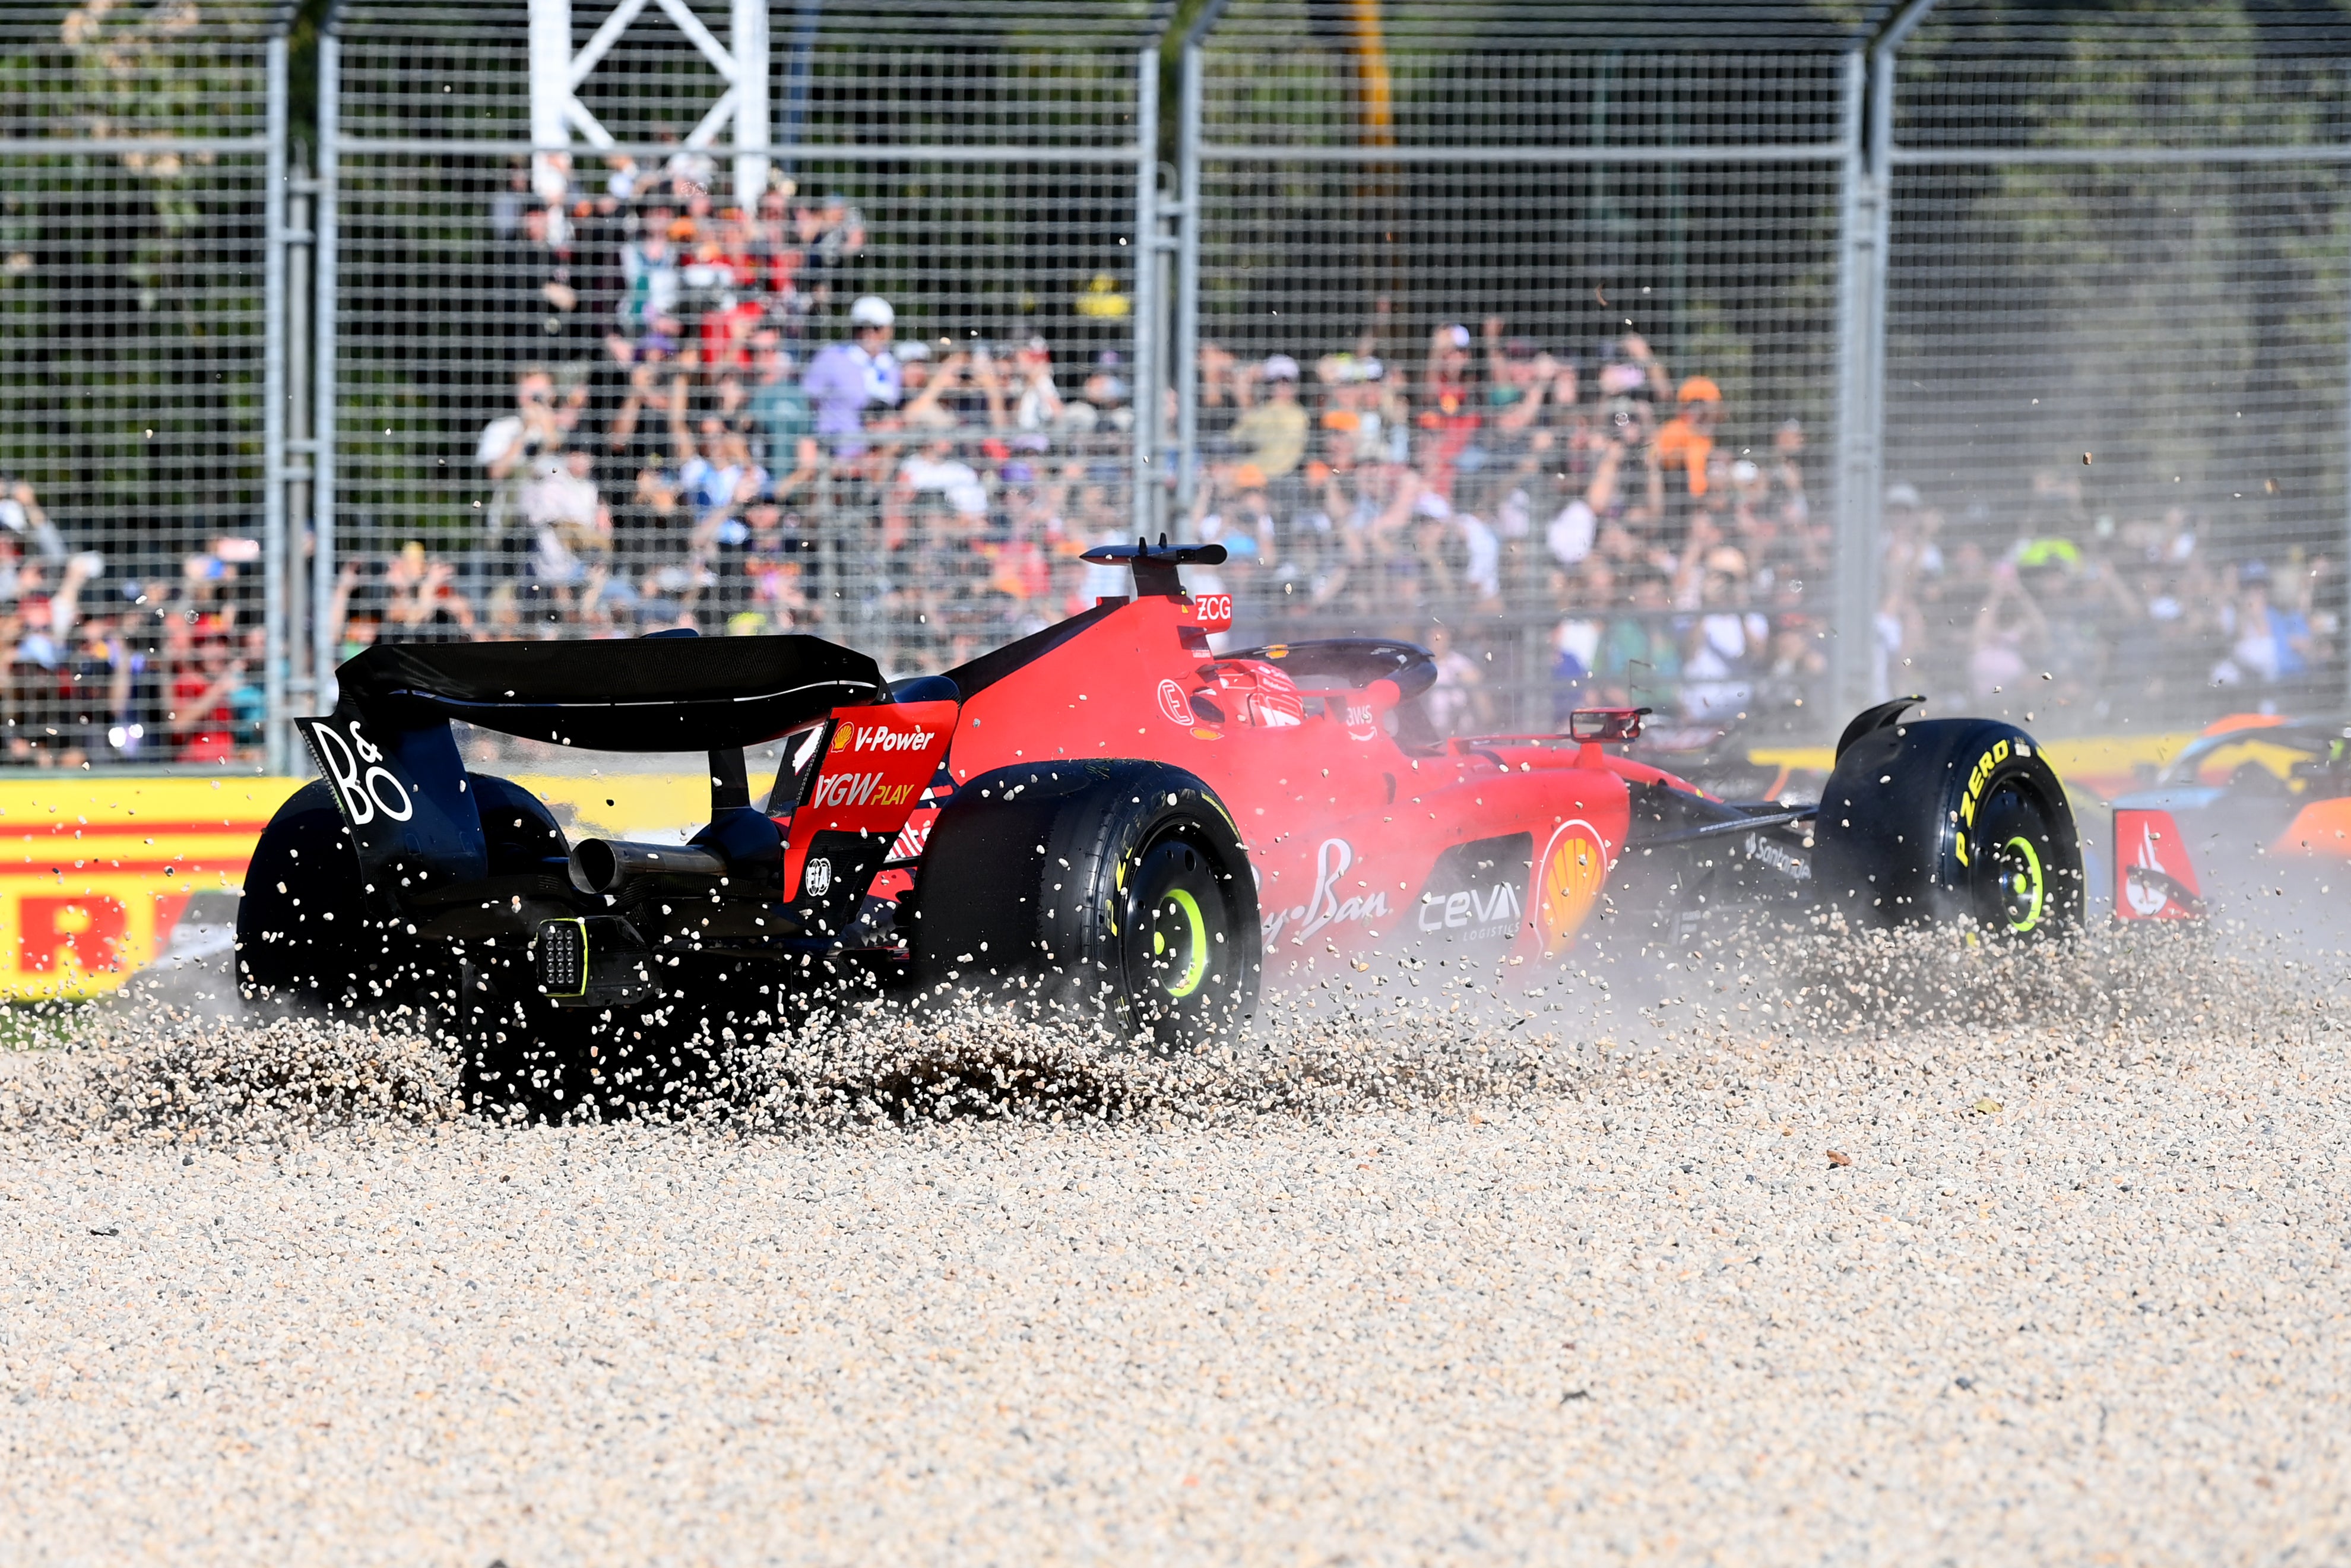 Charles Leclerc retired after lap one as his Ferrari was beached in the gravel